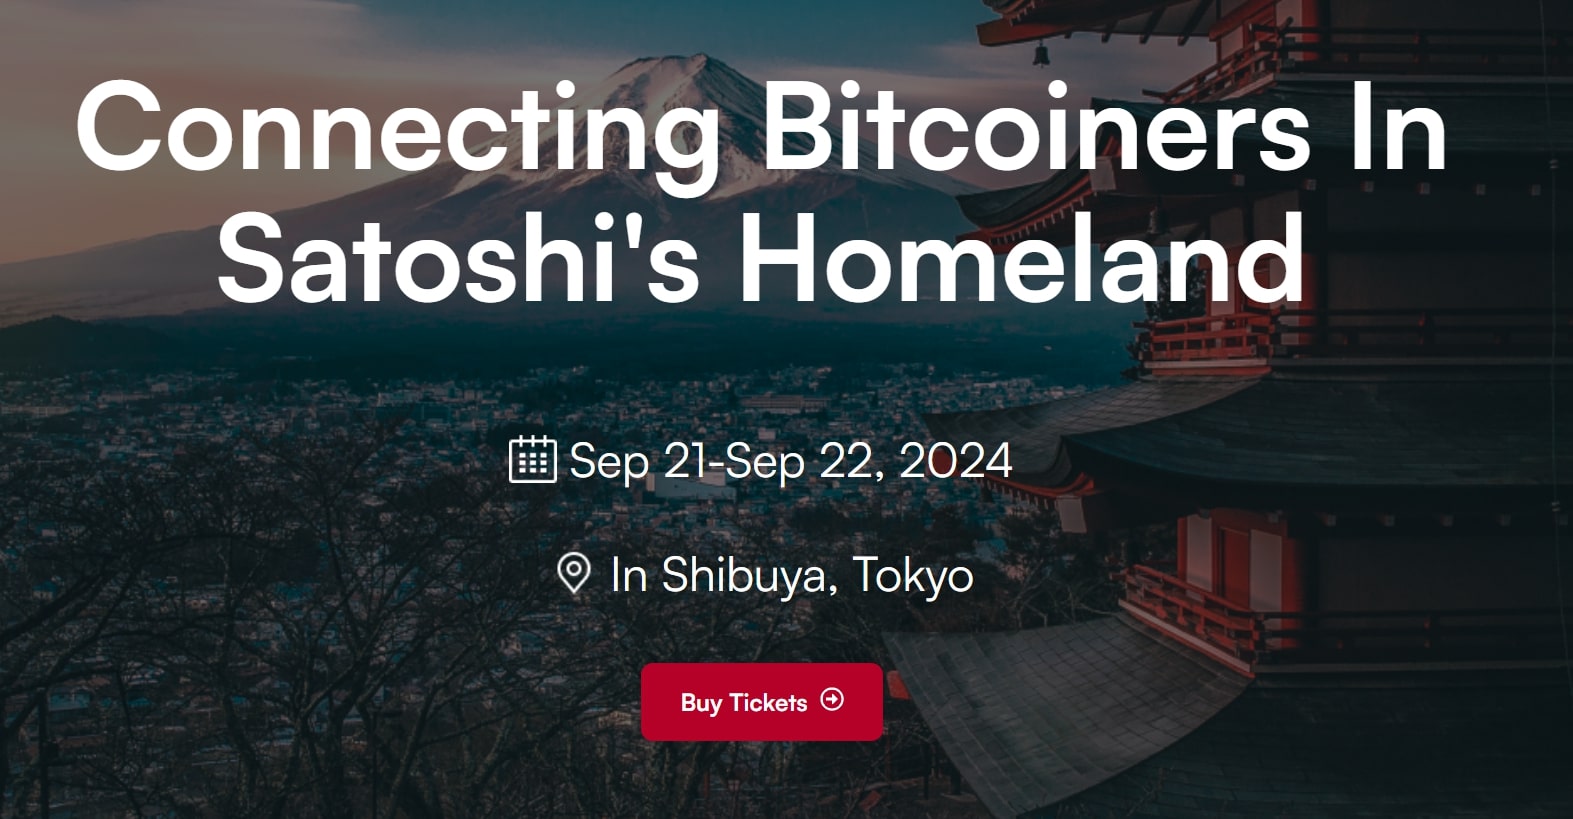 First Bitcoin Conference in Japan - Bitcoin Tokyo 2024 (21st and 22nd of September 2024)